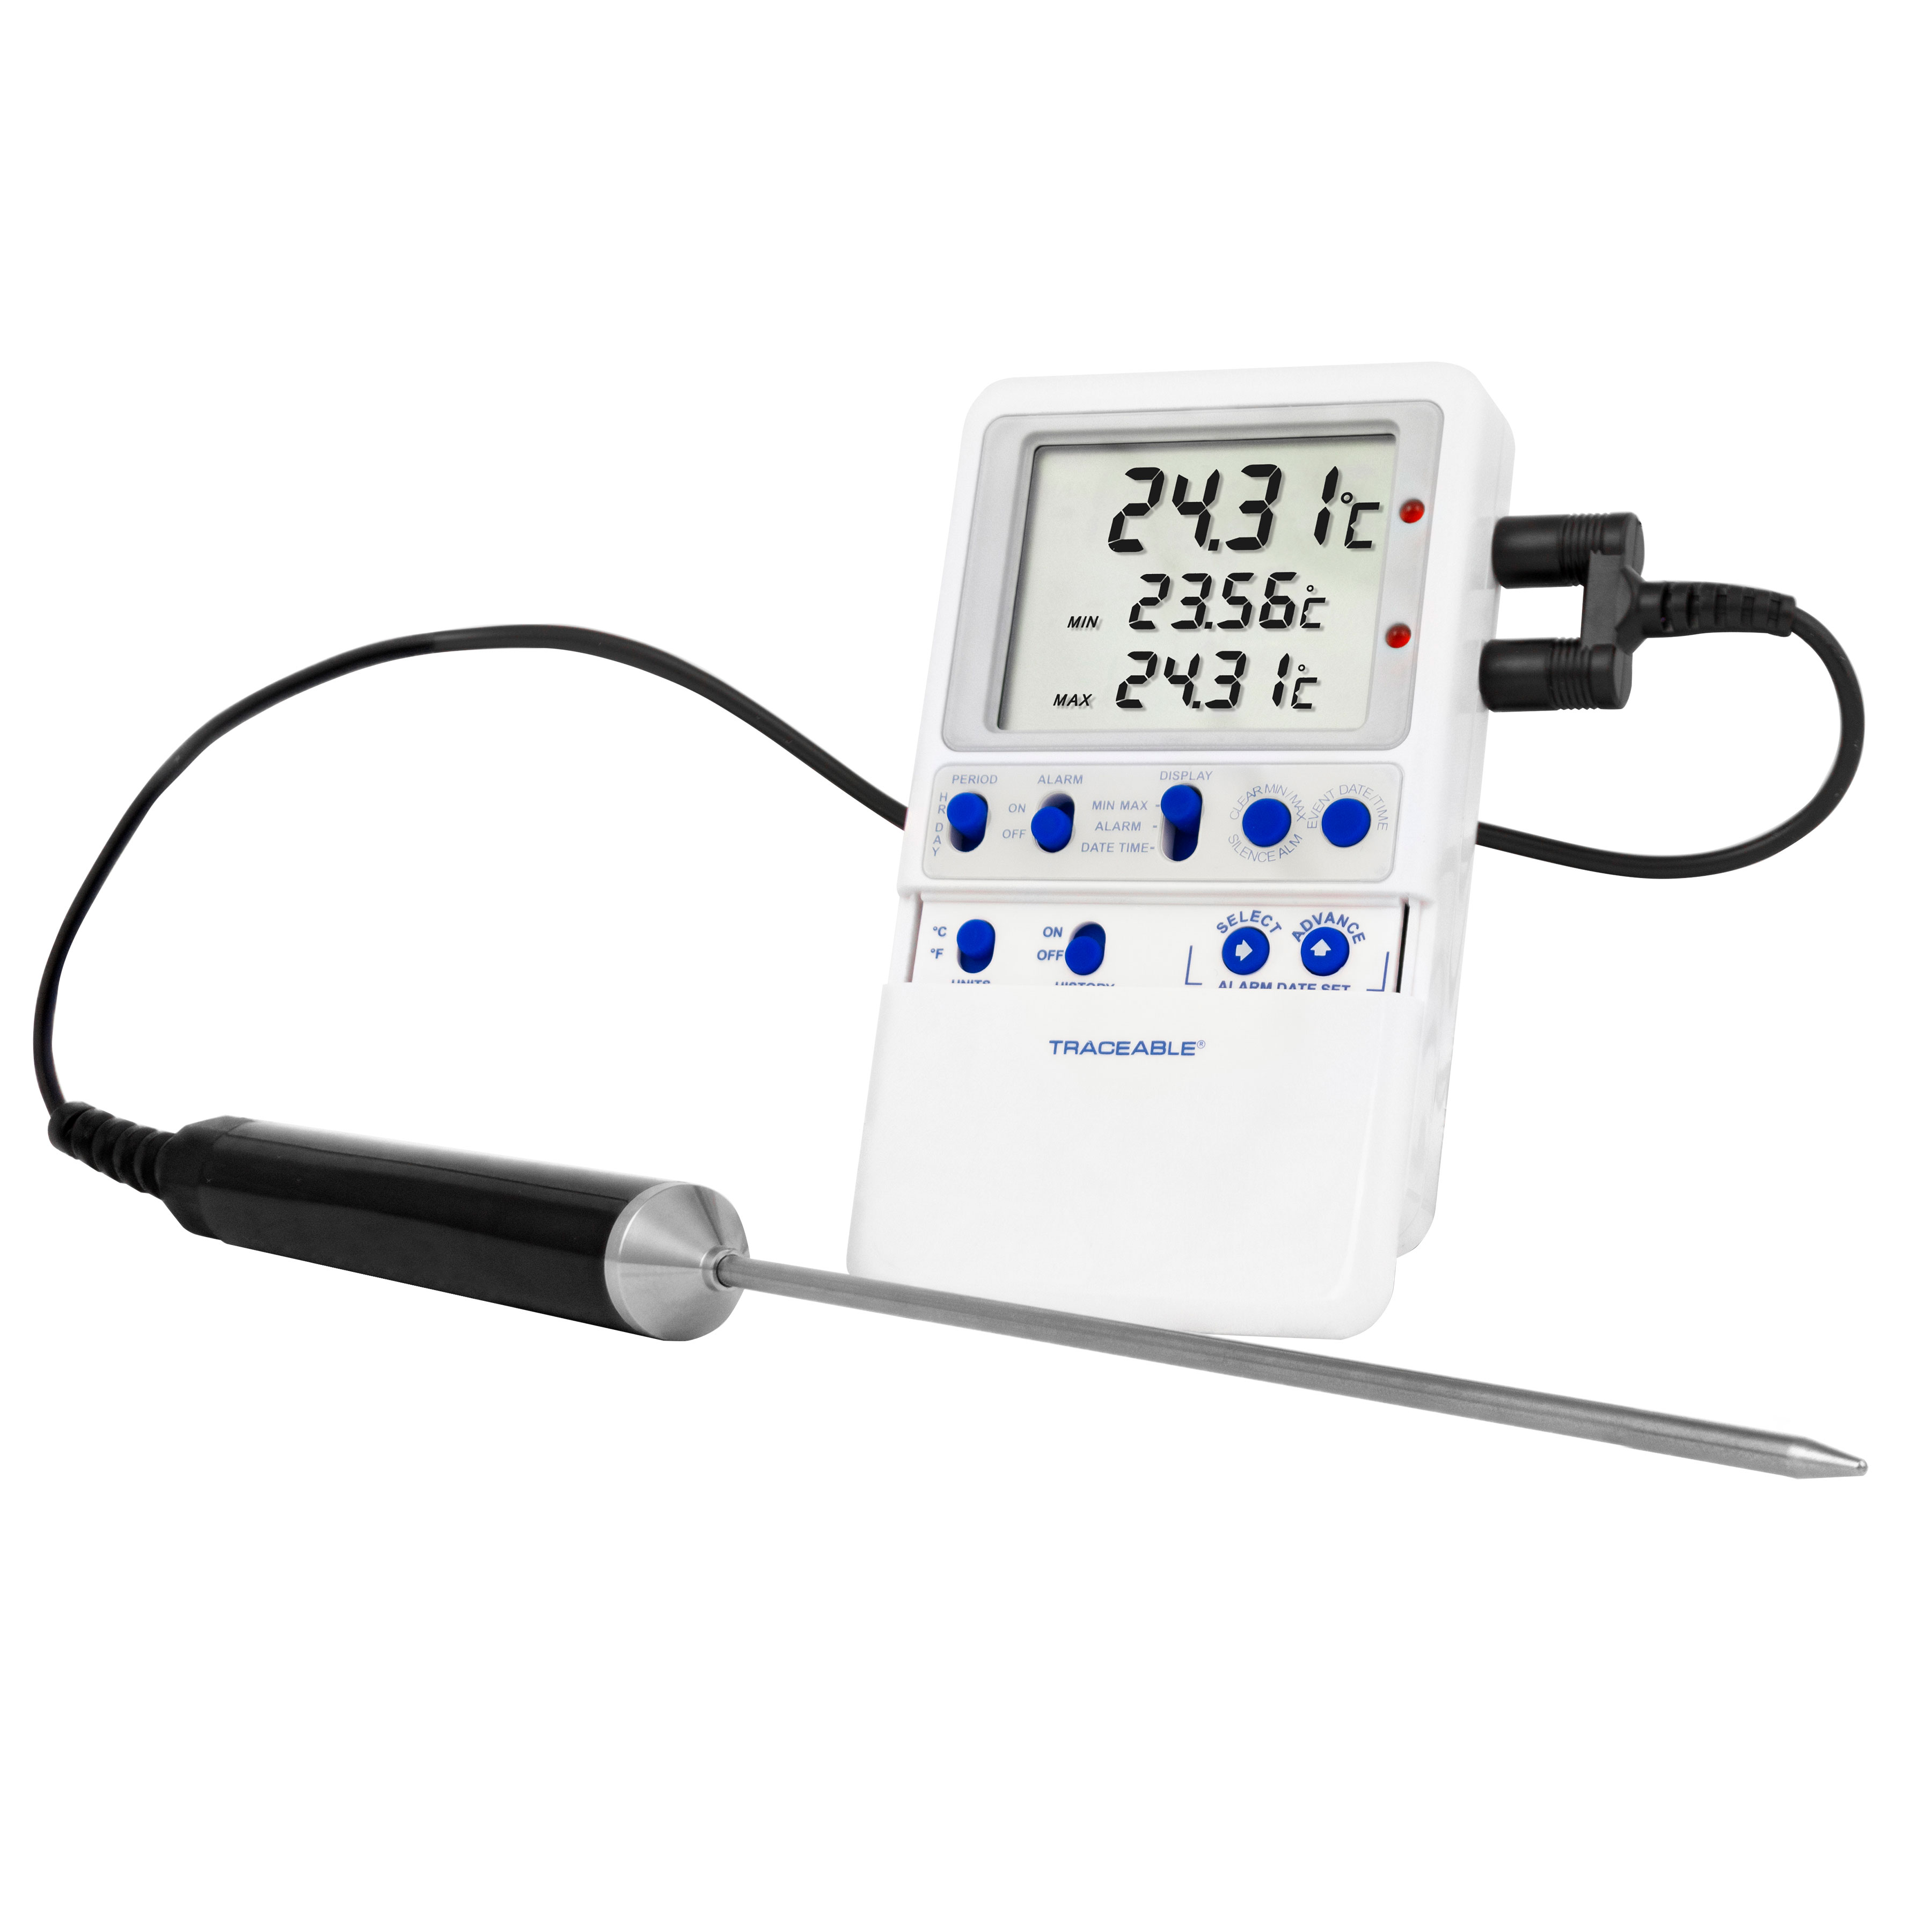 High-Accuracy Refrigerator/Freezer Thermometer